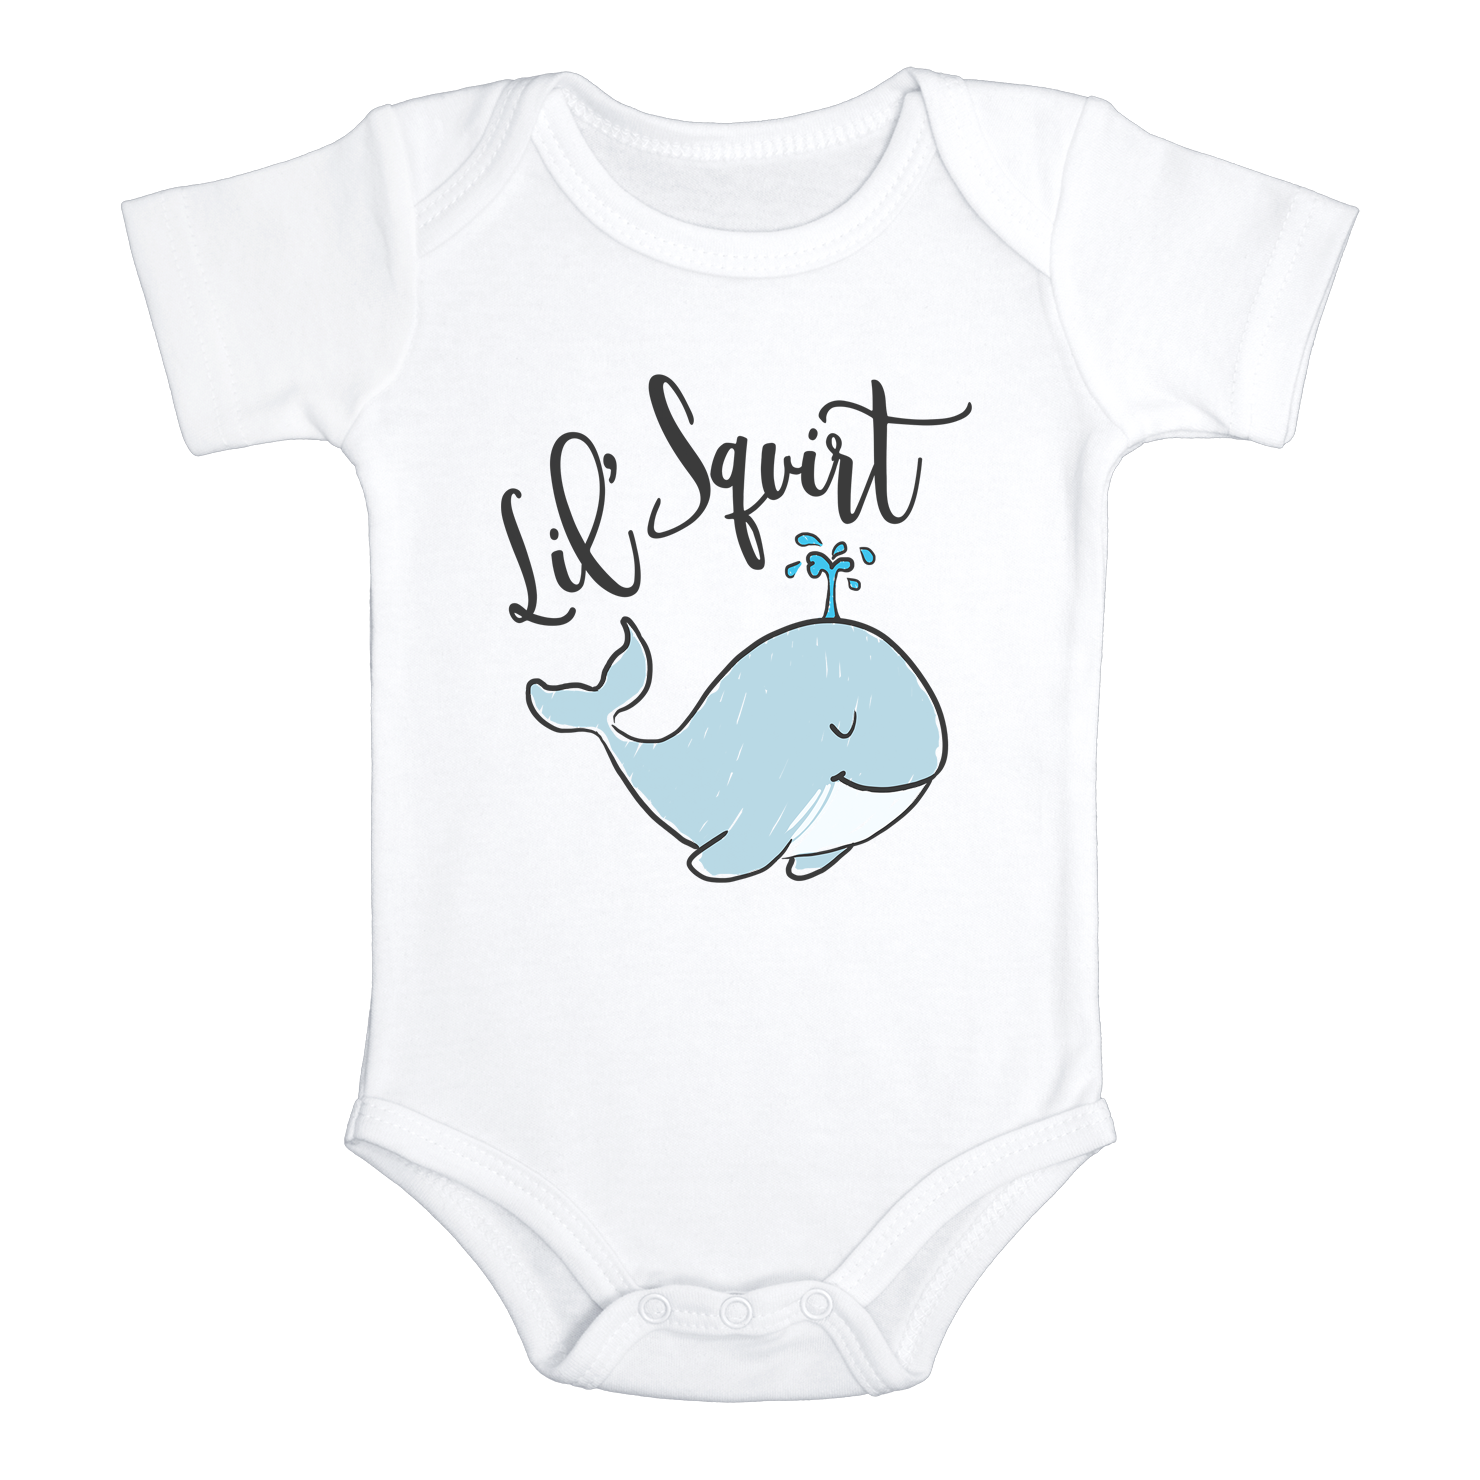 LIL' SQUIRT Funny Baby Bodysuit/ Cute Whale Onesie White - HappyAddition